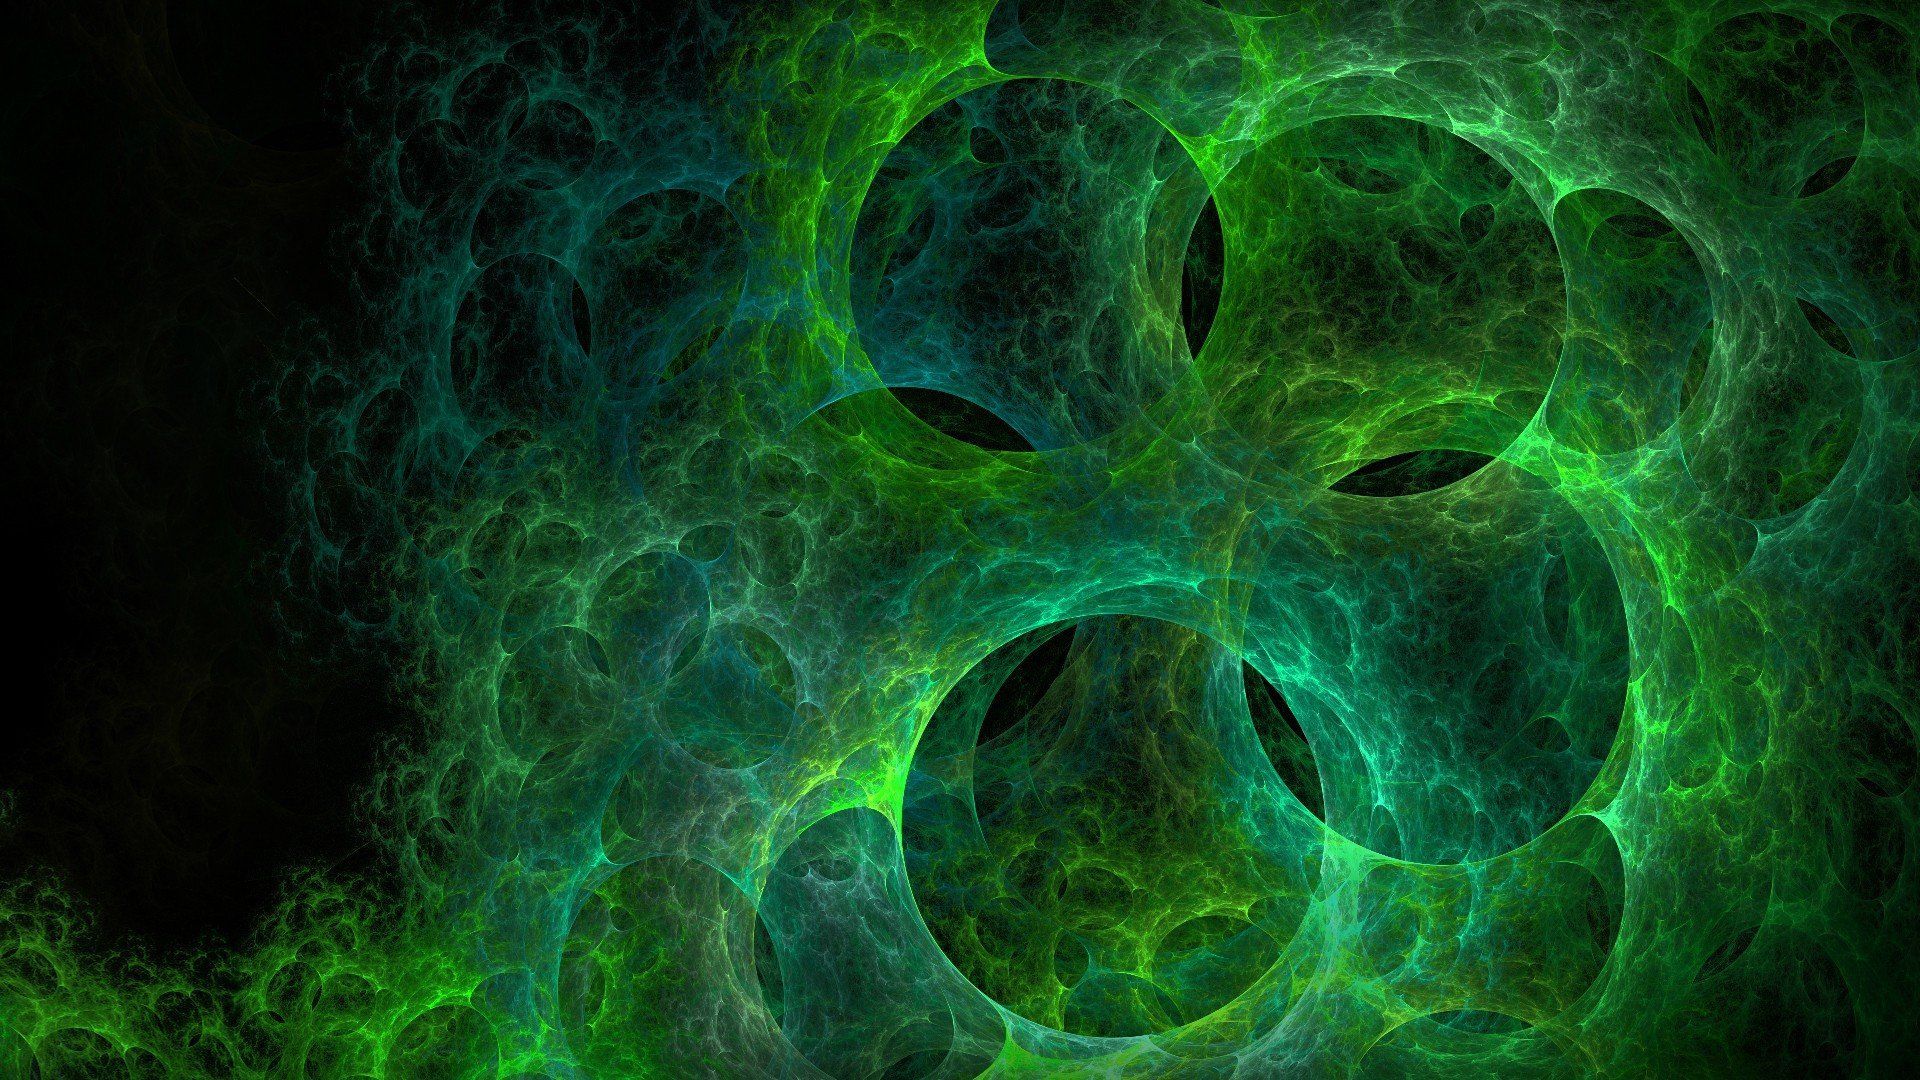 gfx backgrounds space